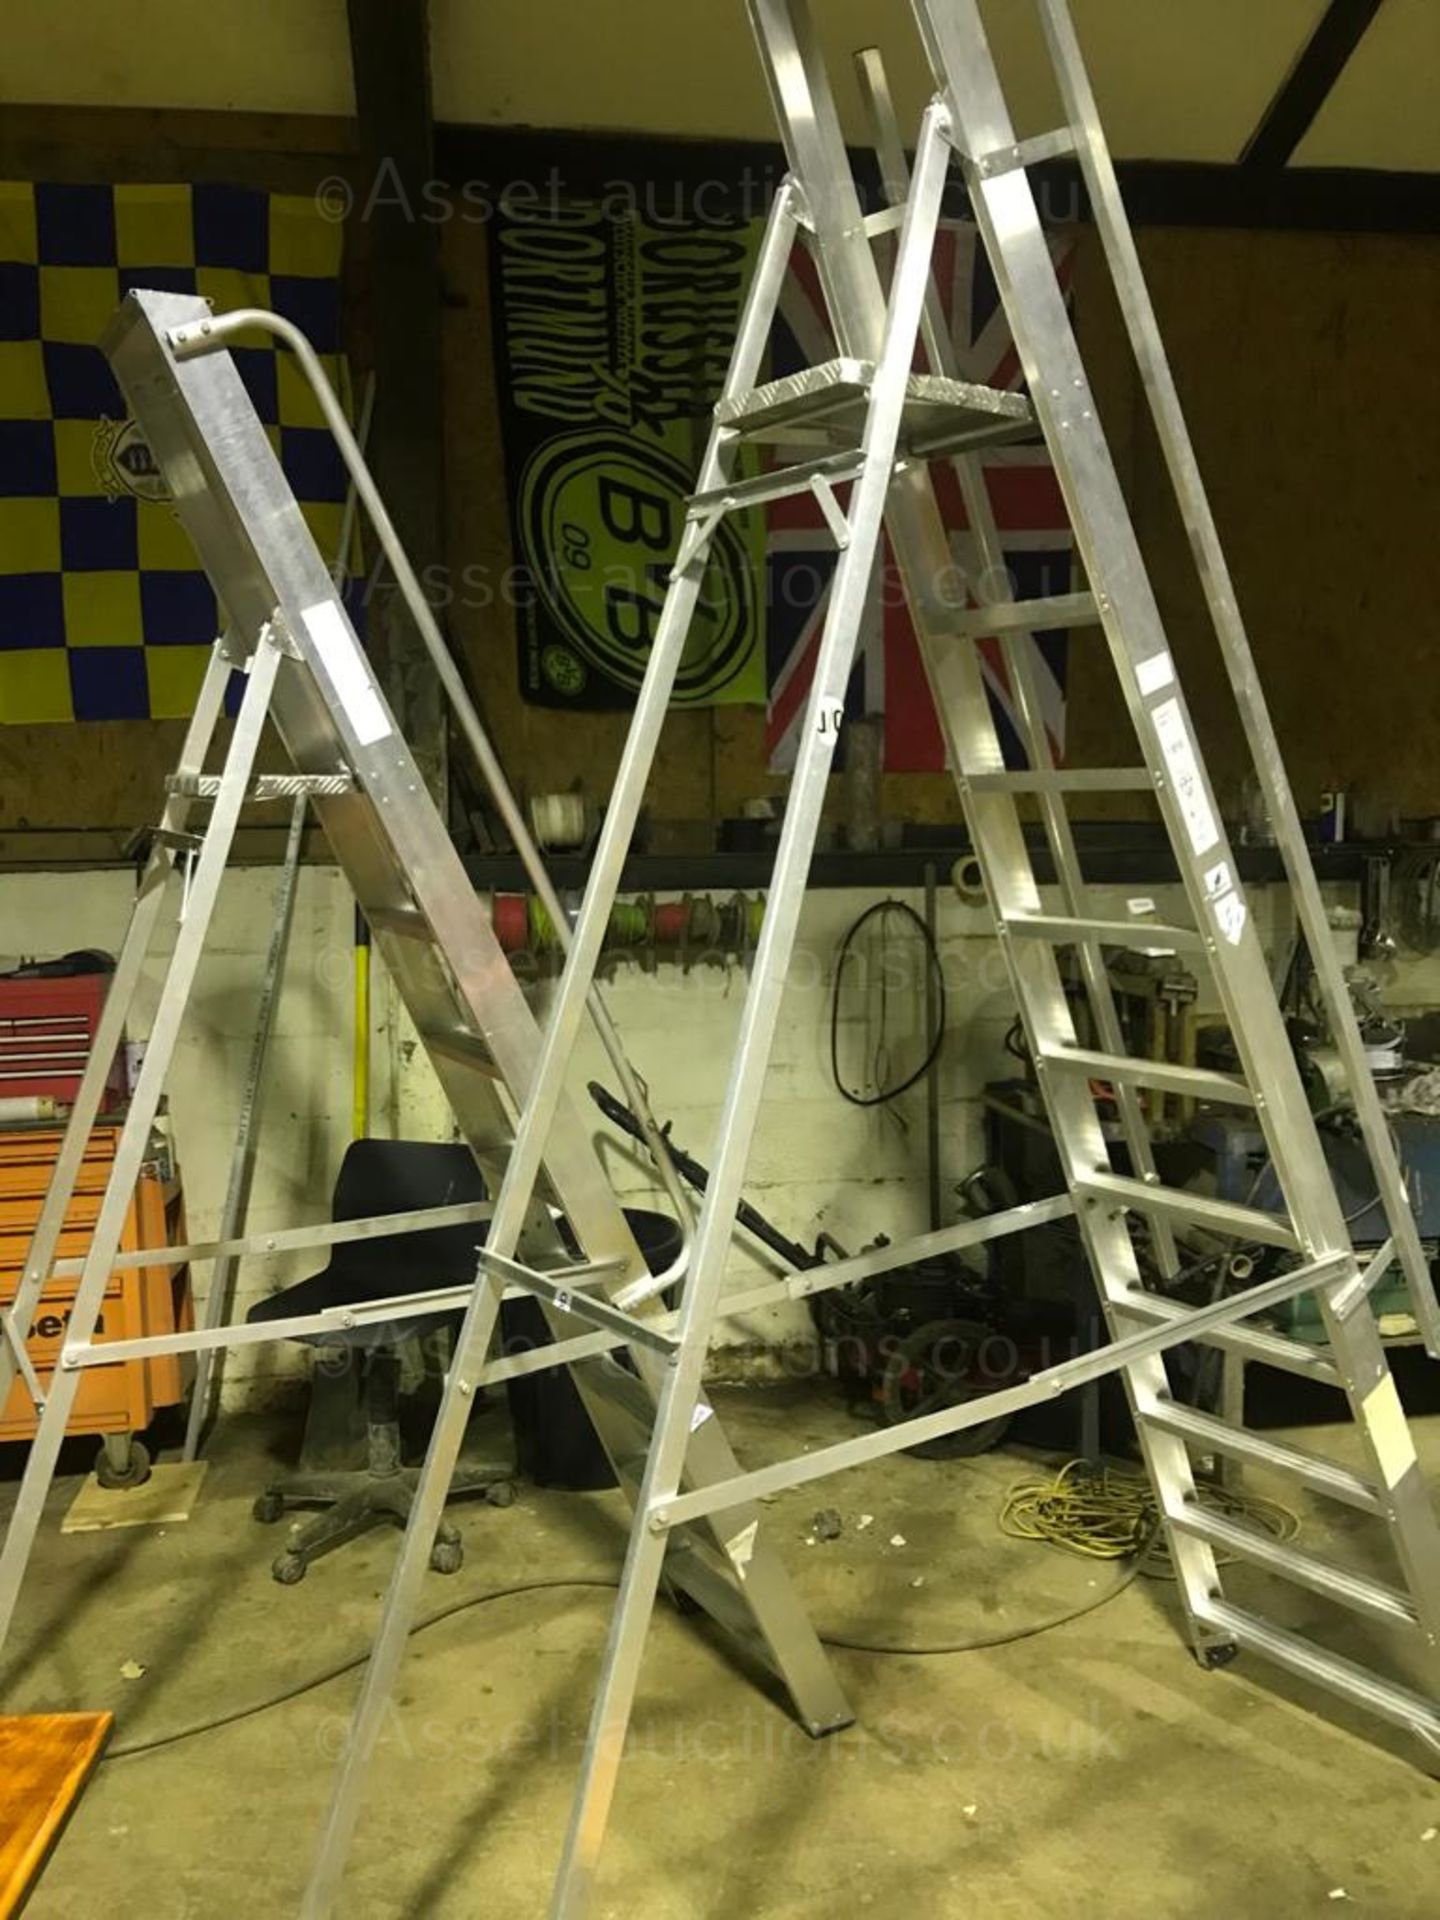 2 SETS OF INDUSTRIAL LADDERS, IN NEW CONDITION, FROM B&Q DEPOT *NO VAT* - Image 2 of 6